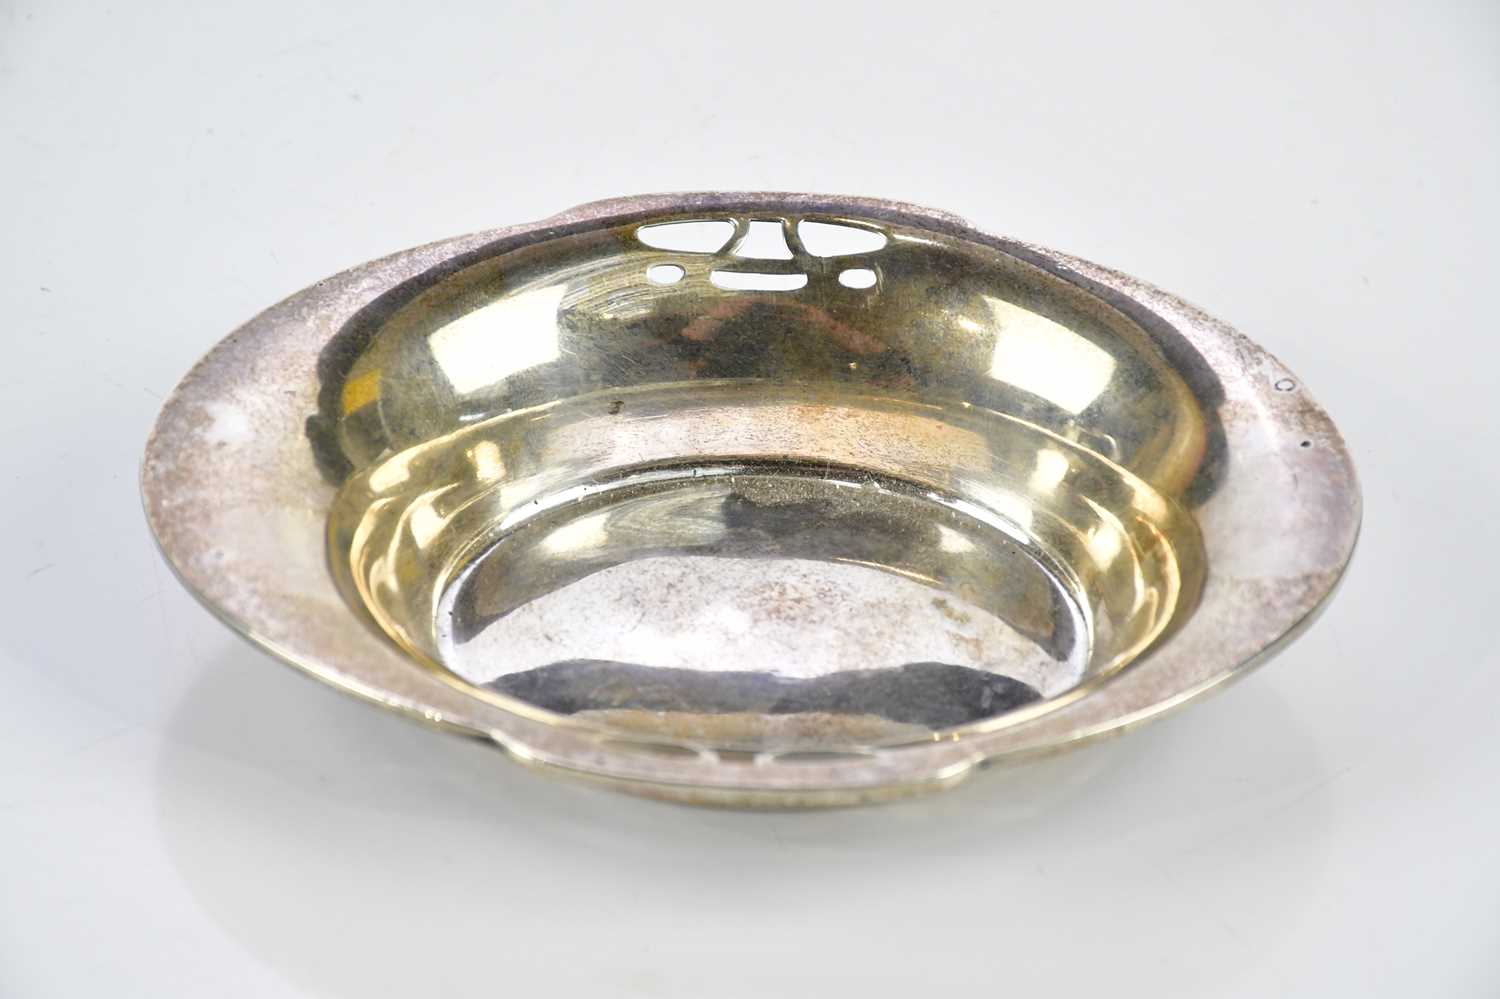 GEORGE LAWRENCE CONNELL; an Edward VII hallmarked silver oval dish, London 1906, 13.5 x 10cm, approx